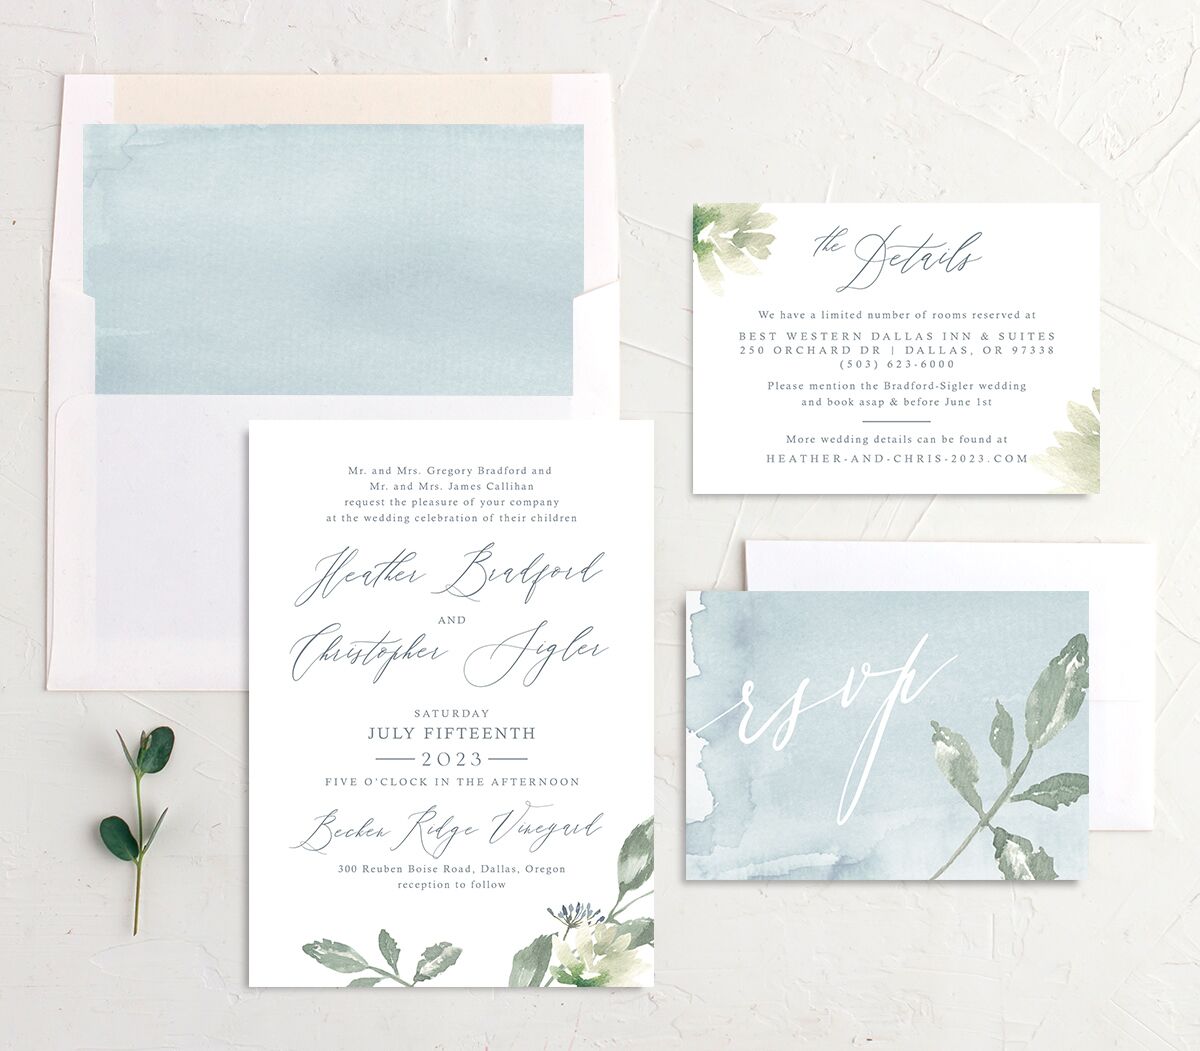 Watercolor Floral Wedding Invitations suite in French Blue